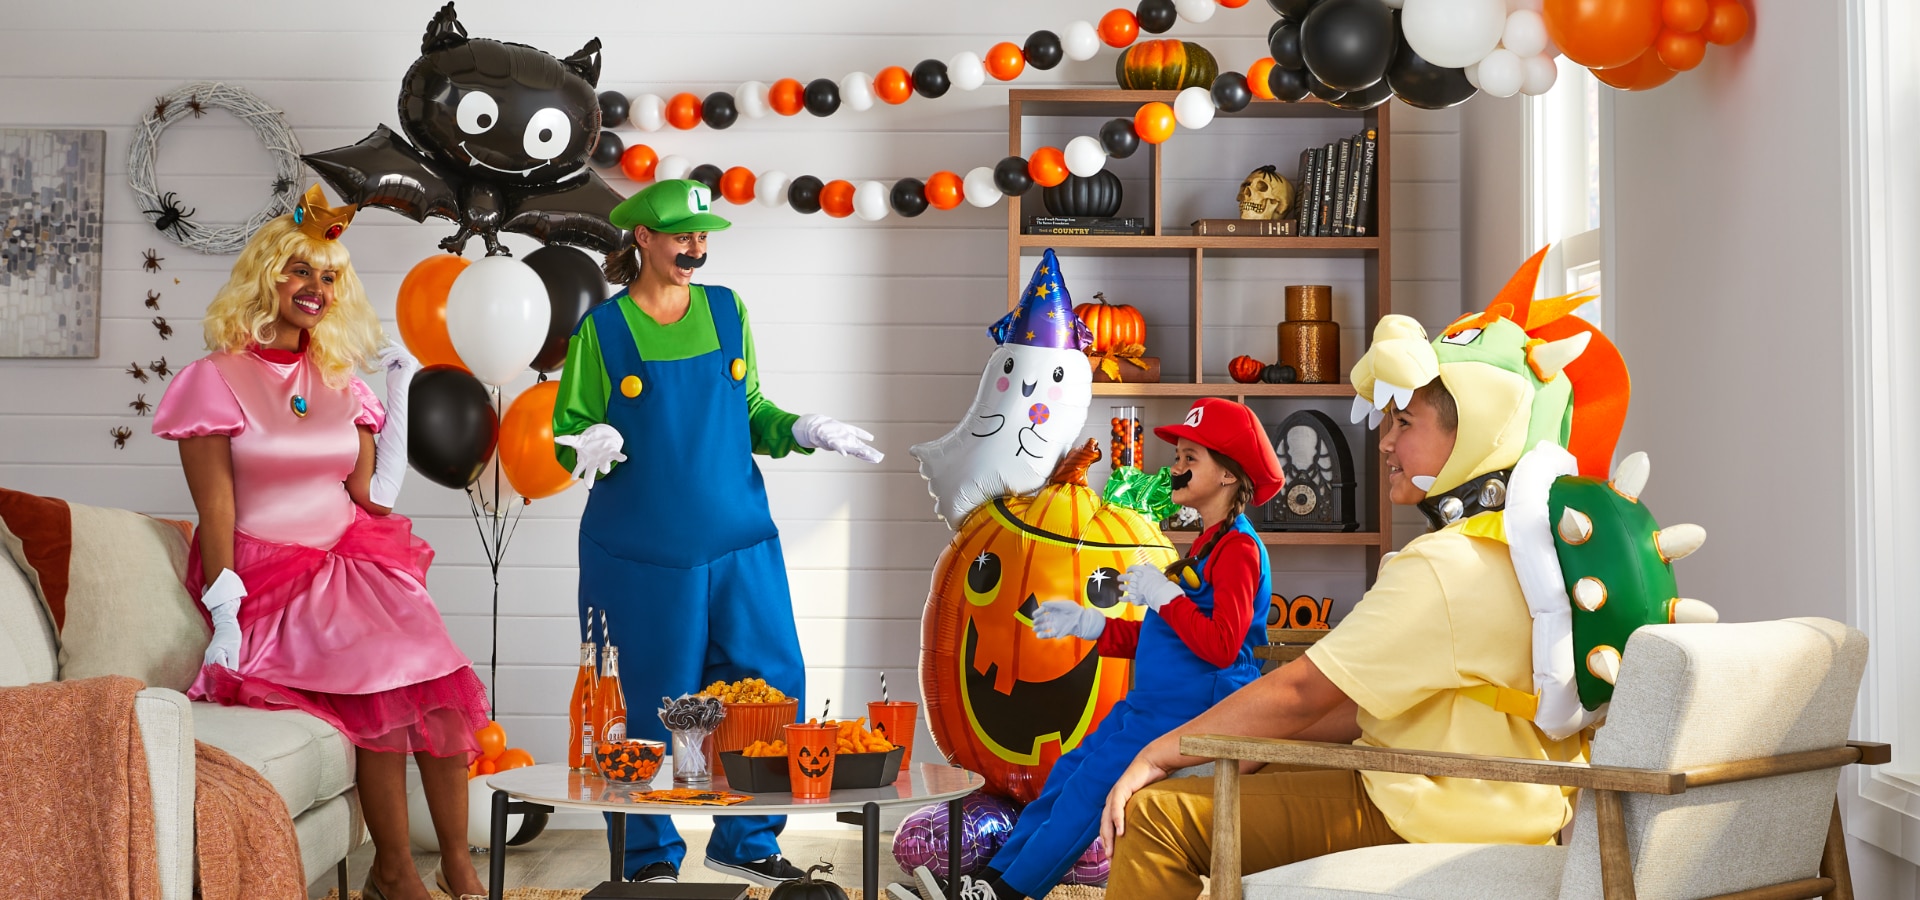 A family wearing Super Mario character costumes in a living room filled with Halloween balloons and decorations.